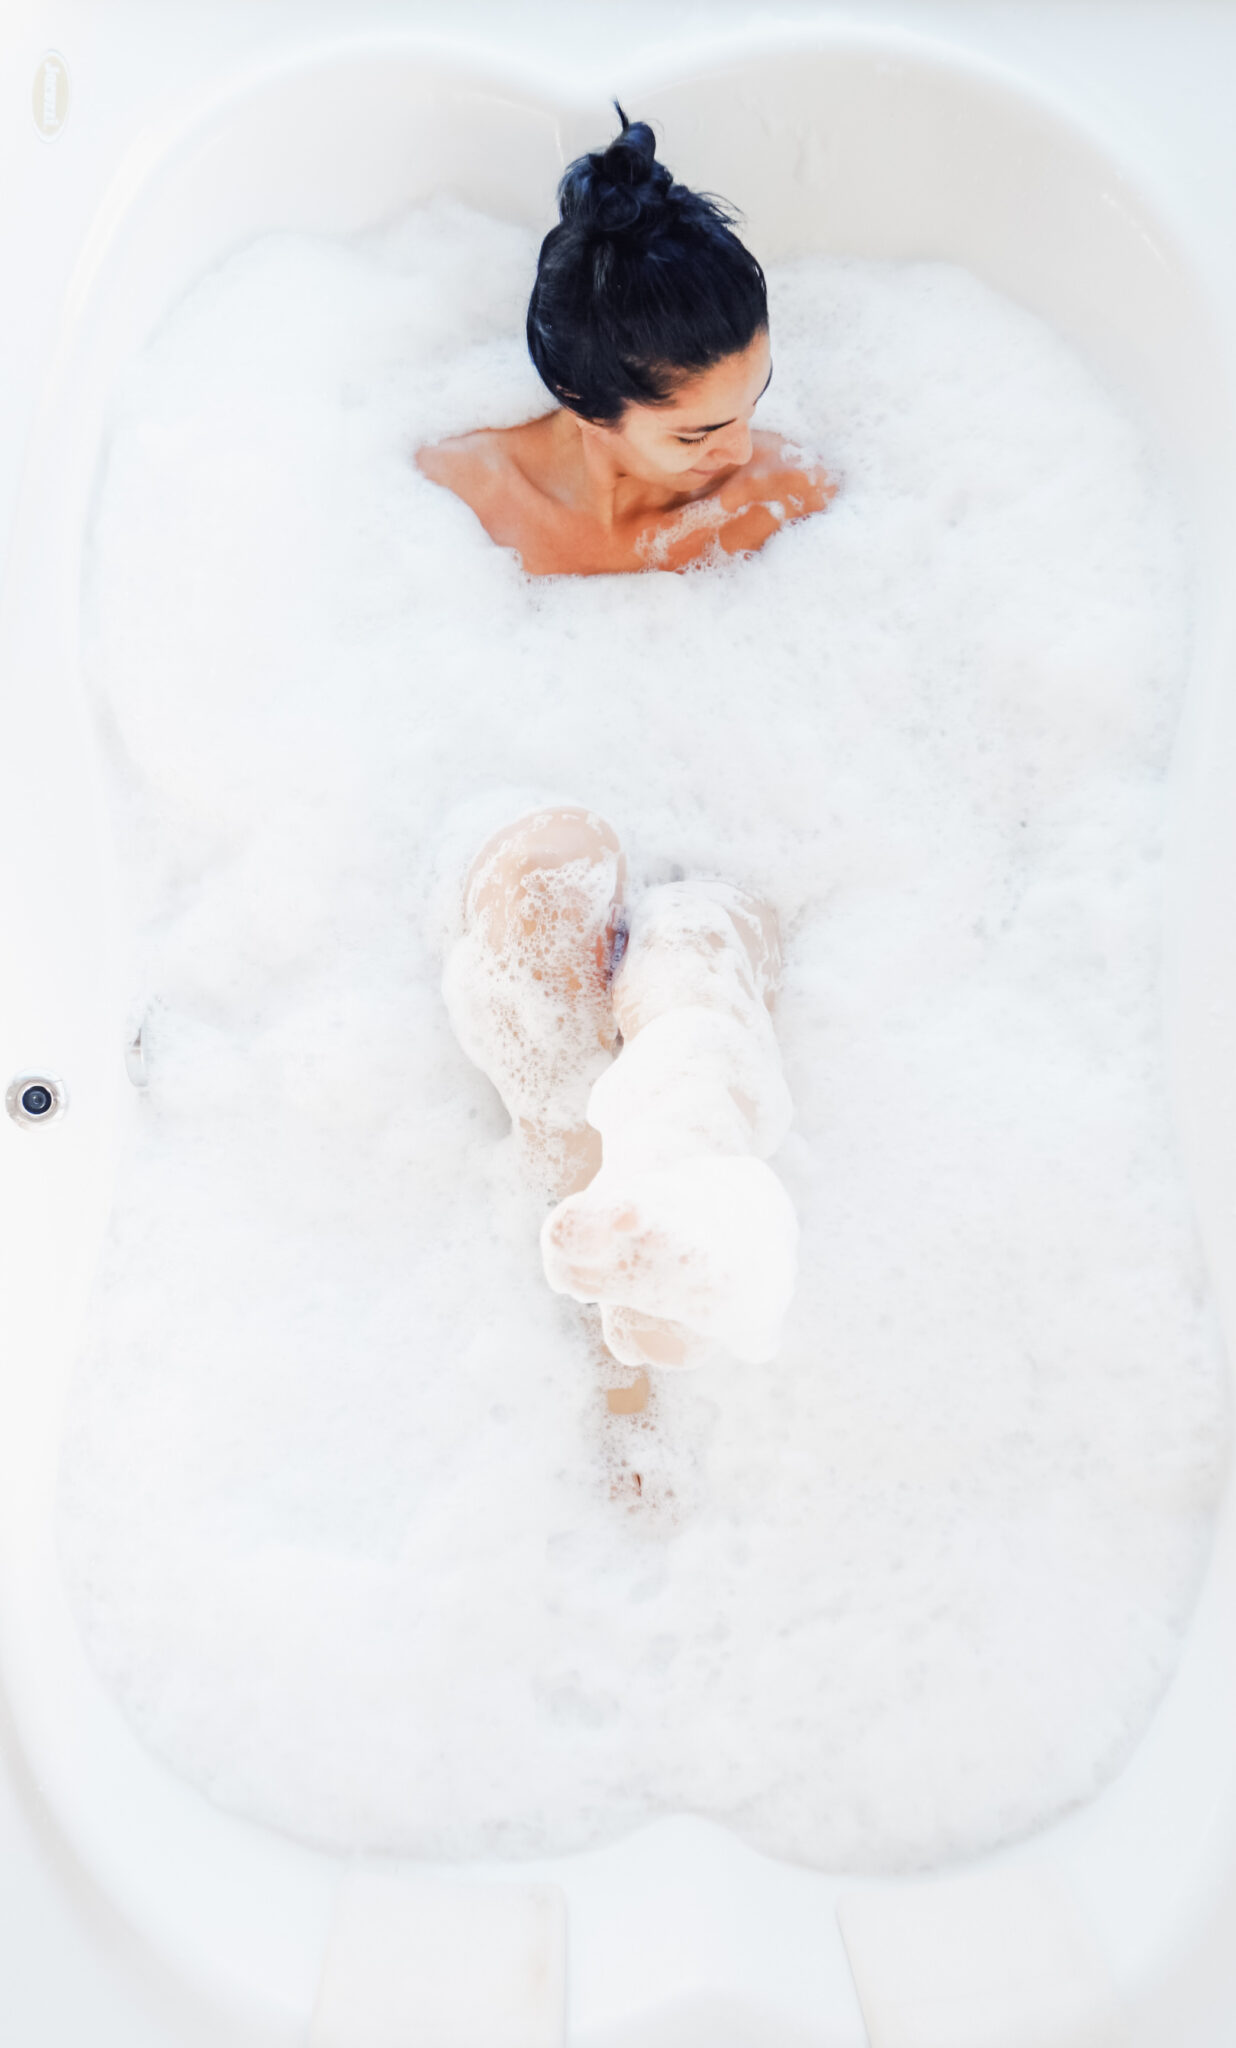 Woman smiles while she relaxes in a bathtub. This article covers why moms need guilt-free time to themselves.